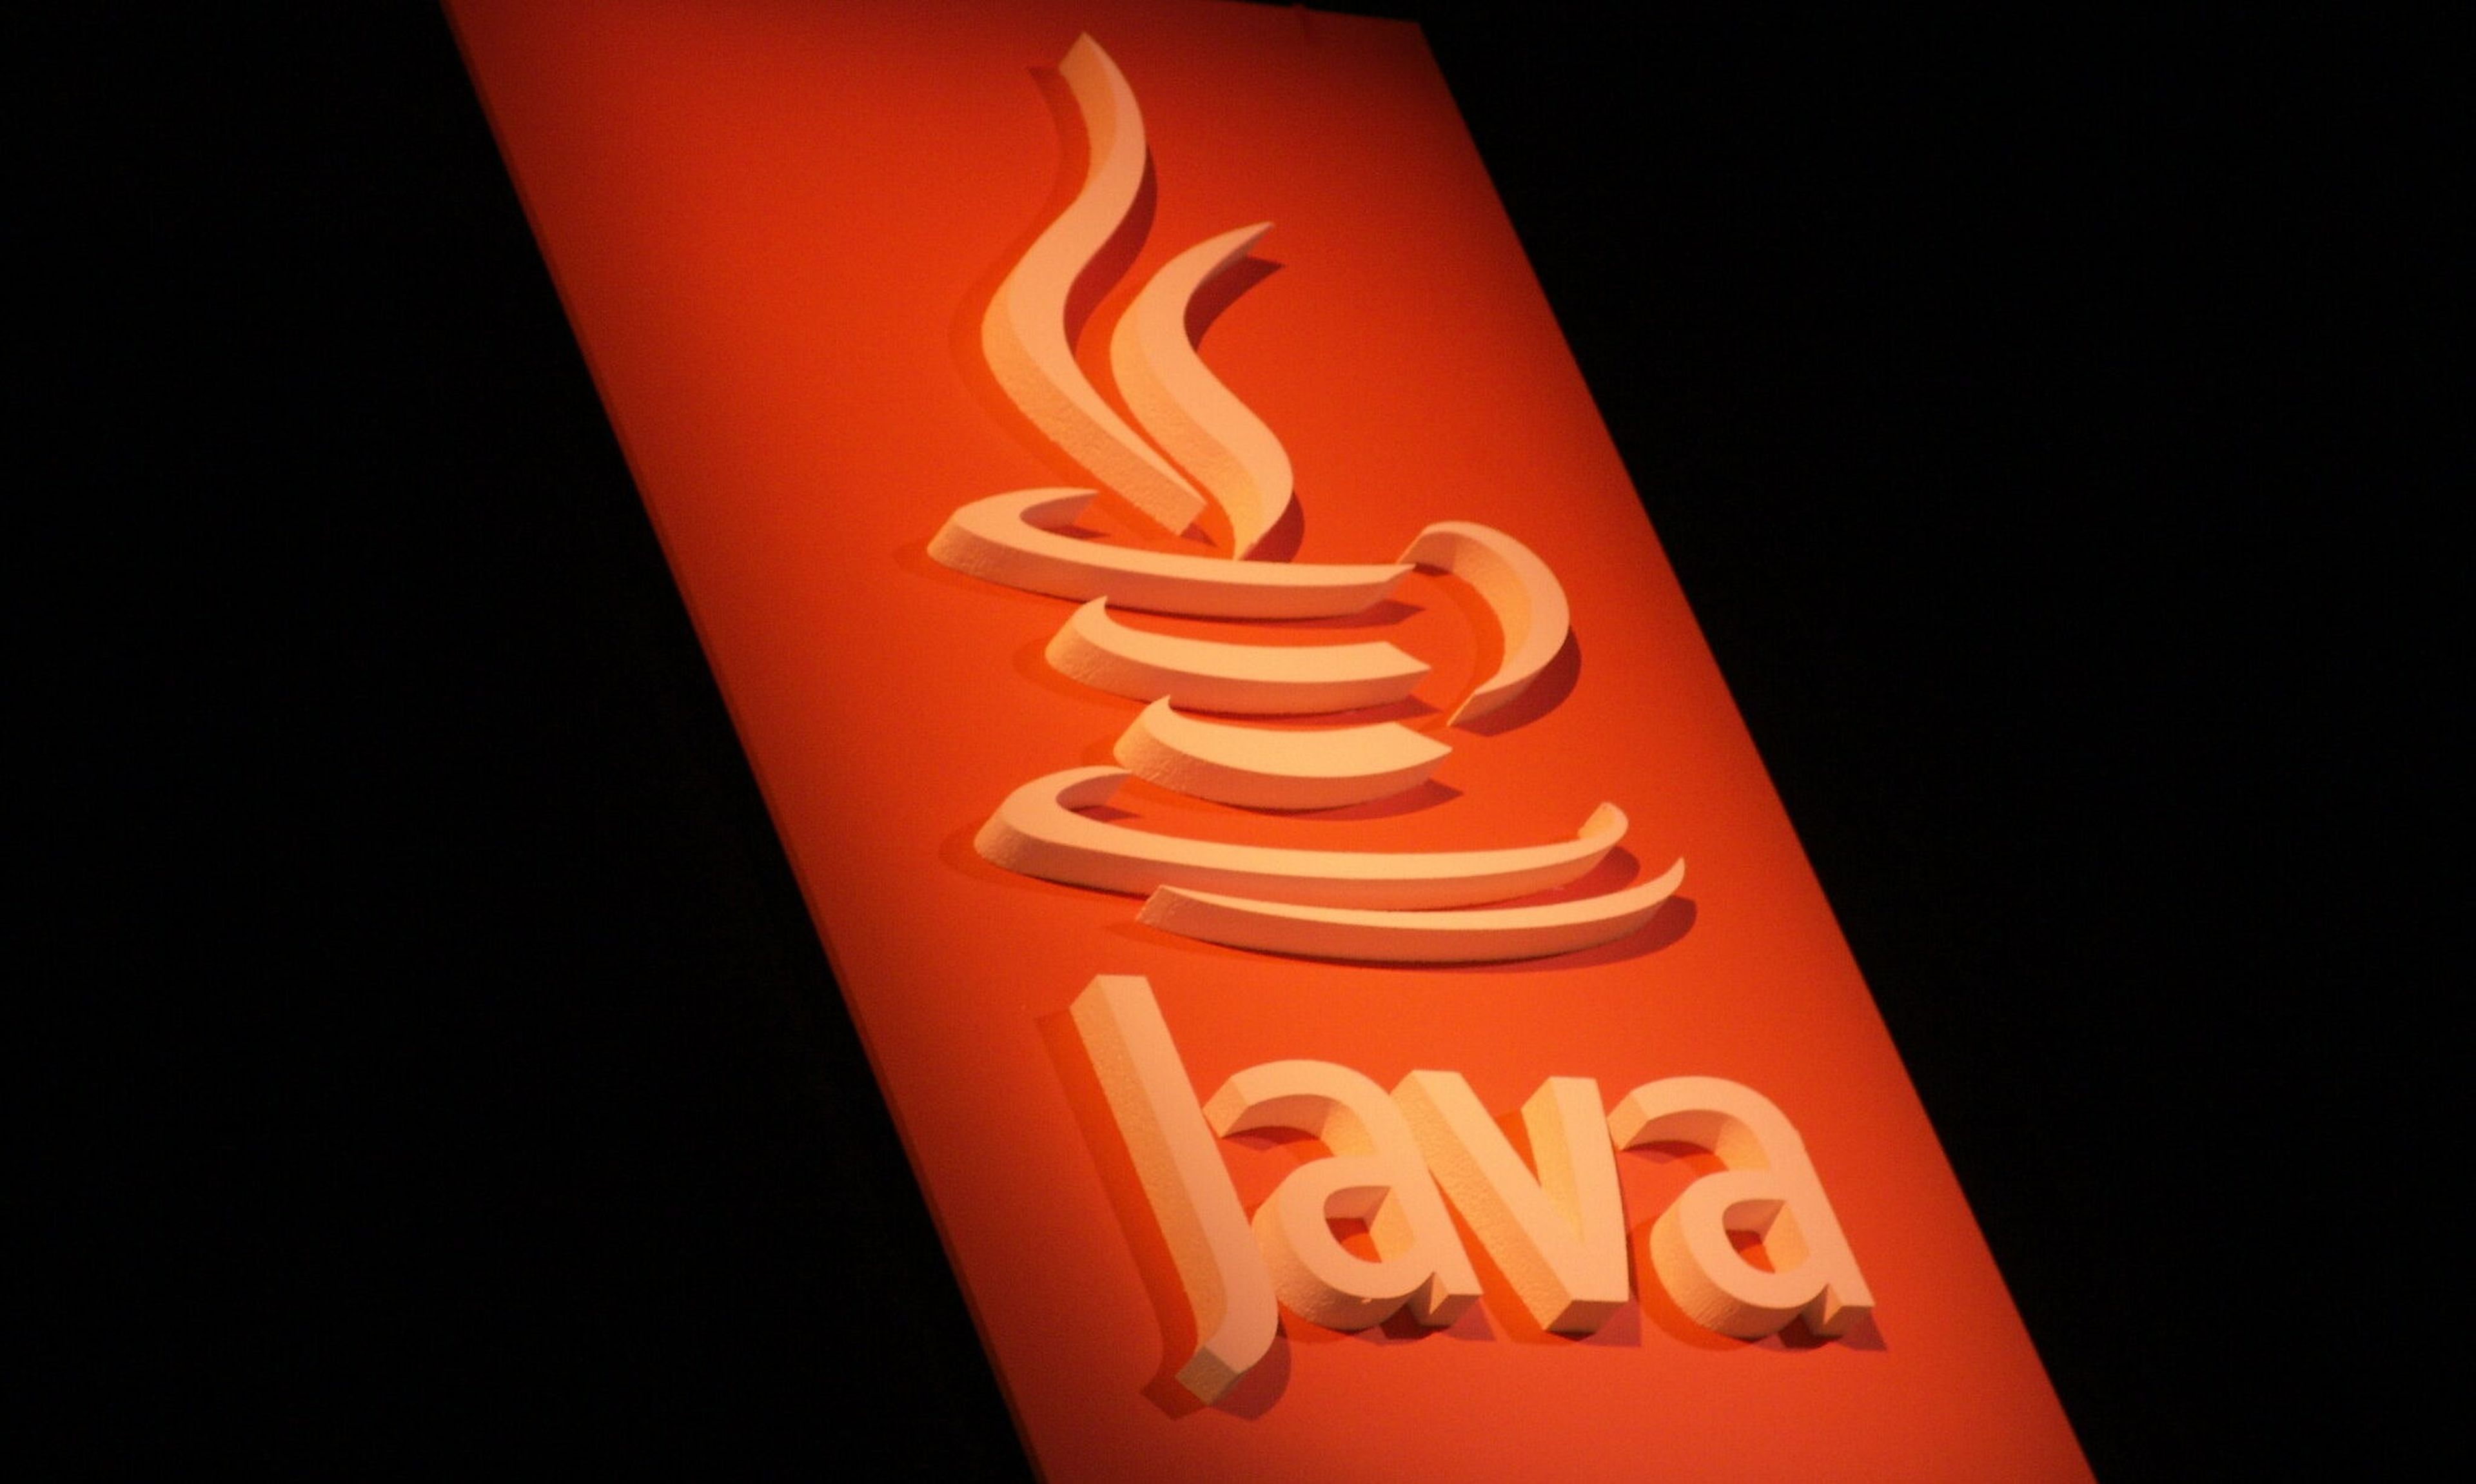 (&#8220;Java Logo&#8221; by mrjoro is licensed under CC BY-NC 2.0)